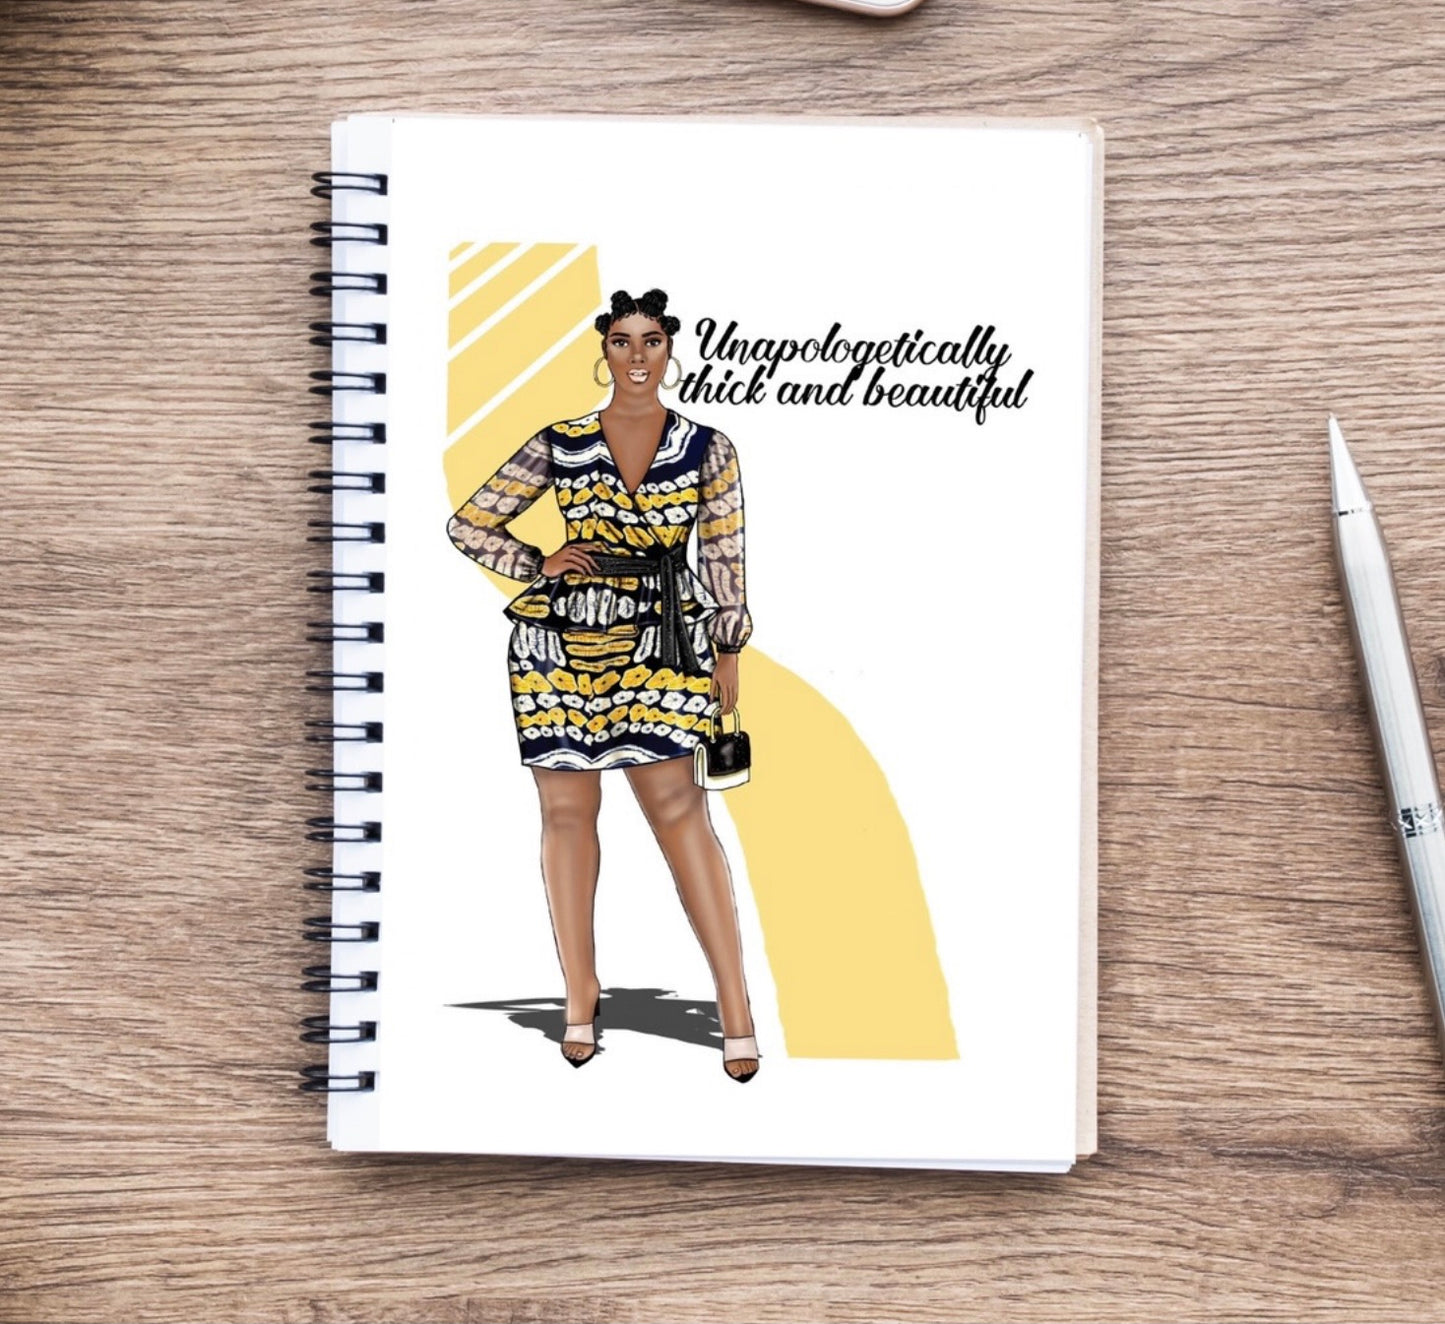 Unapologetically thick and beautiful inspirational wire notebook/journal